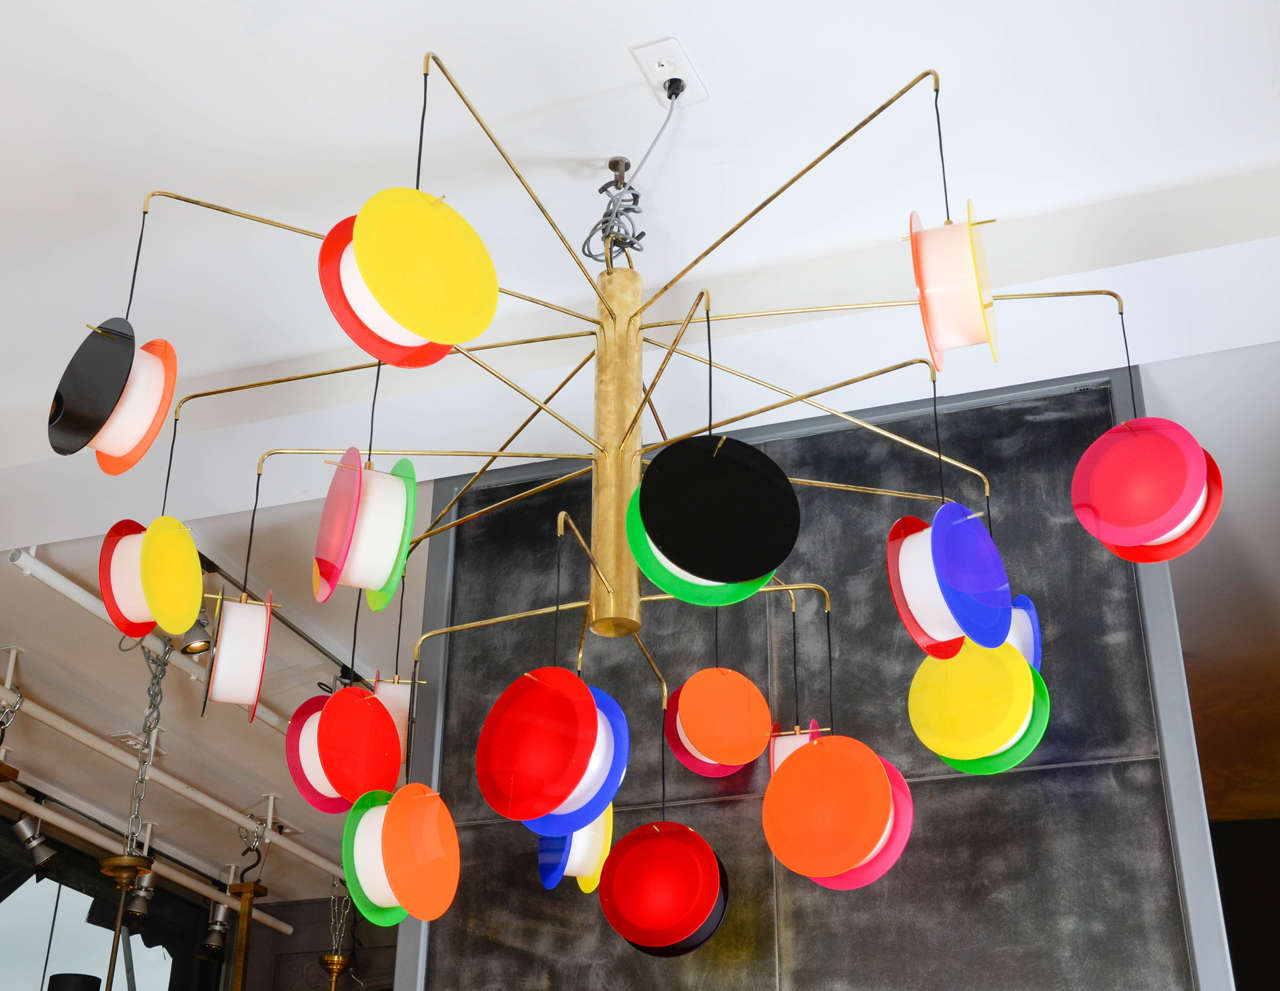 Unique chandelier by Adriano Albini made of a brass structure and arms on which hang 20 colored module.
Each module is made of a white plexiglass round between two colored circles.
Every color is randomly put among the arms.